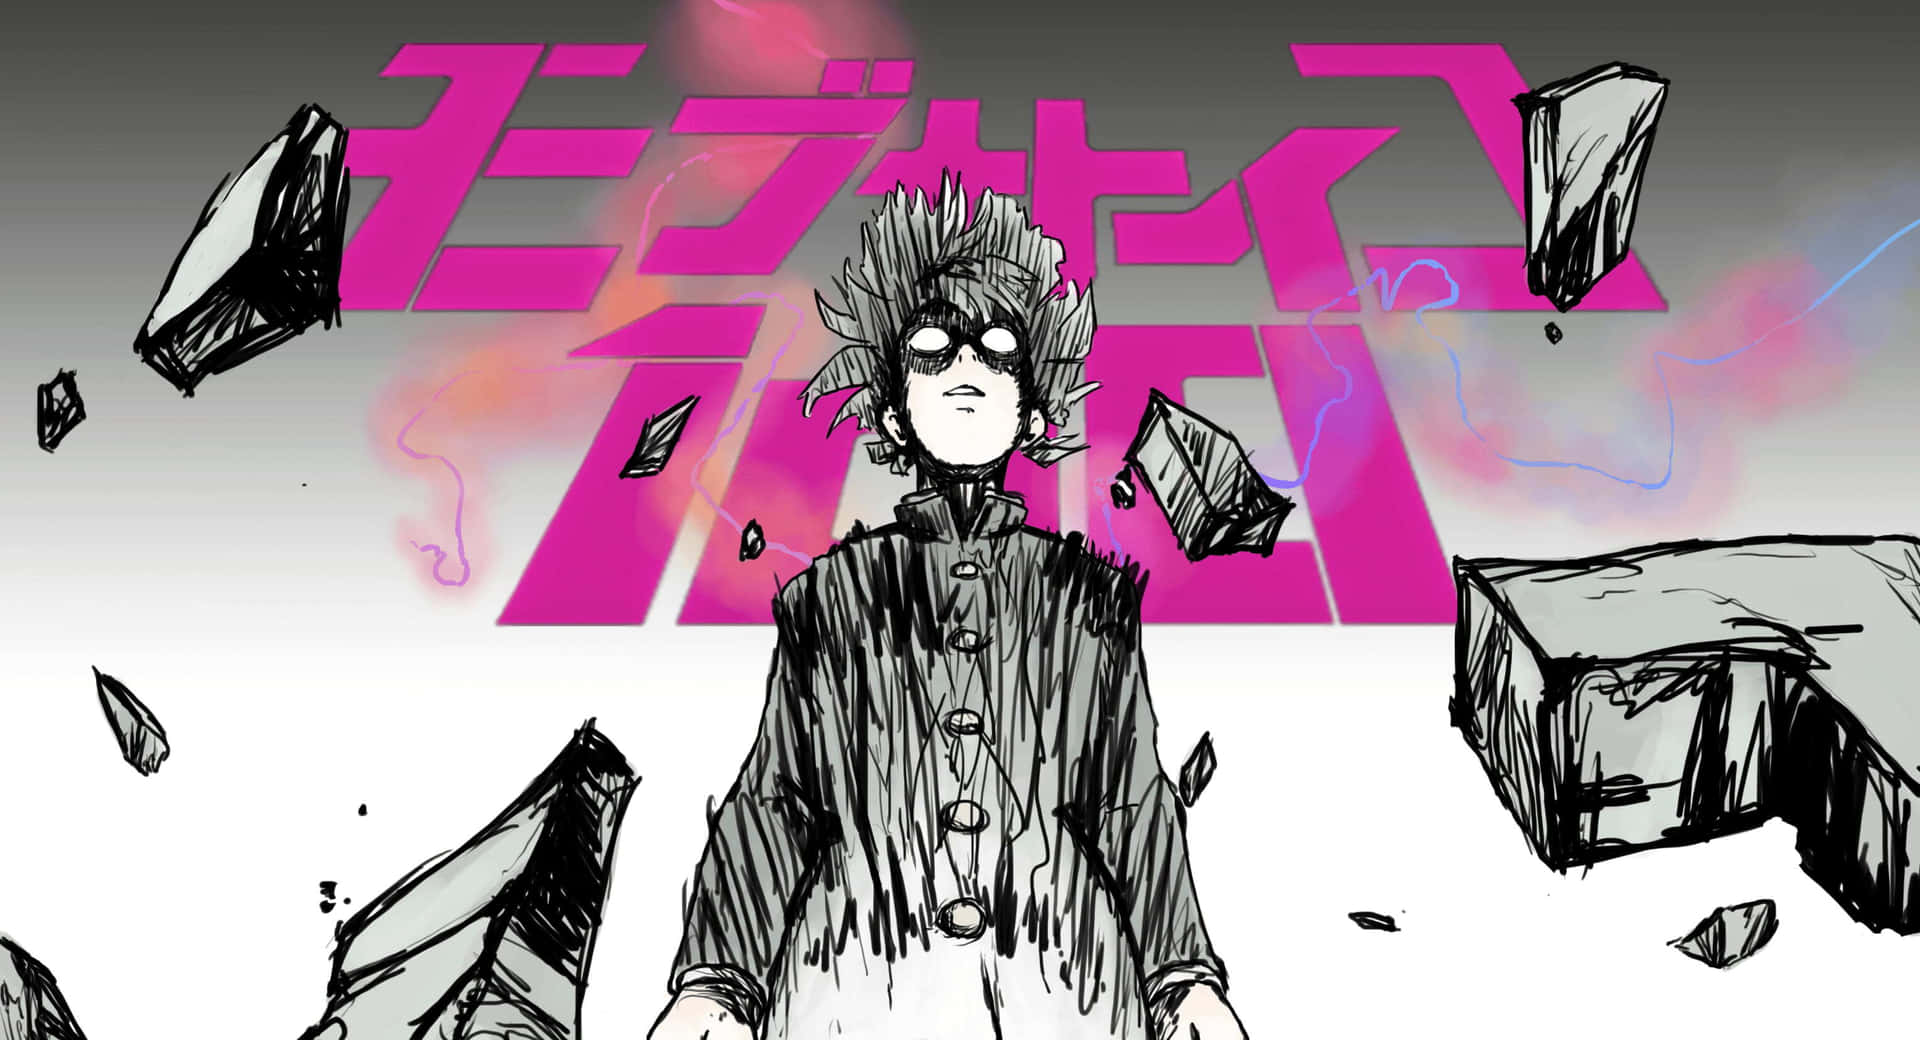 Shigeo Kageyama, also known as Mob, showcasing his psychic powers in an intense scene Wallpaper